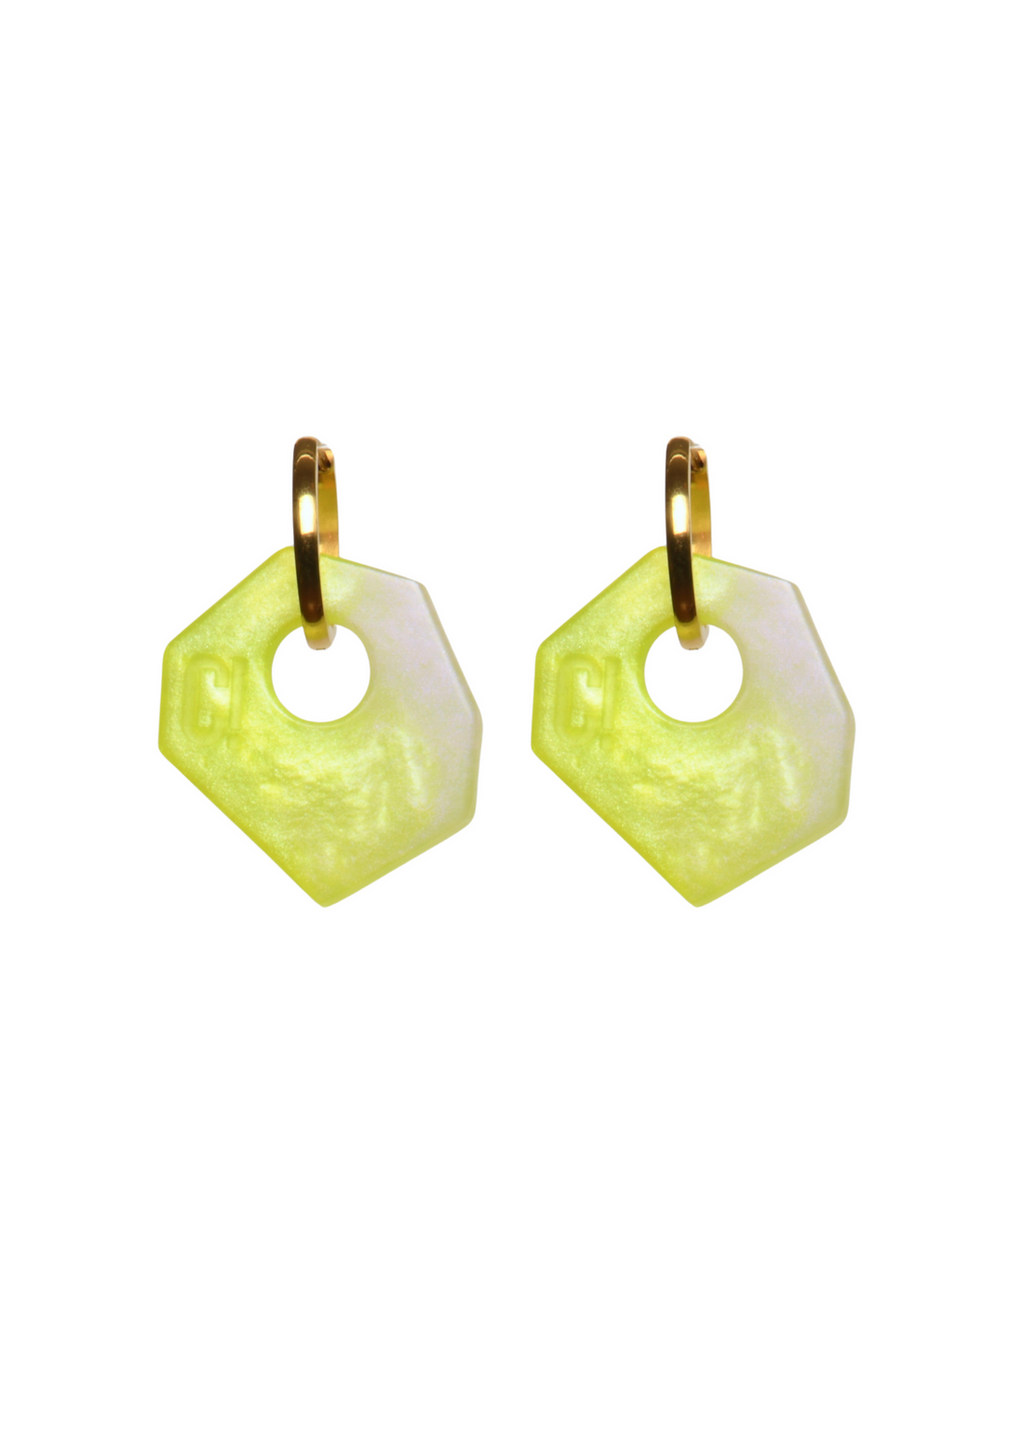 Ear Candy White and Yellow Earrings